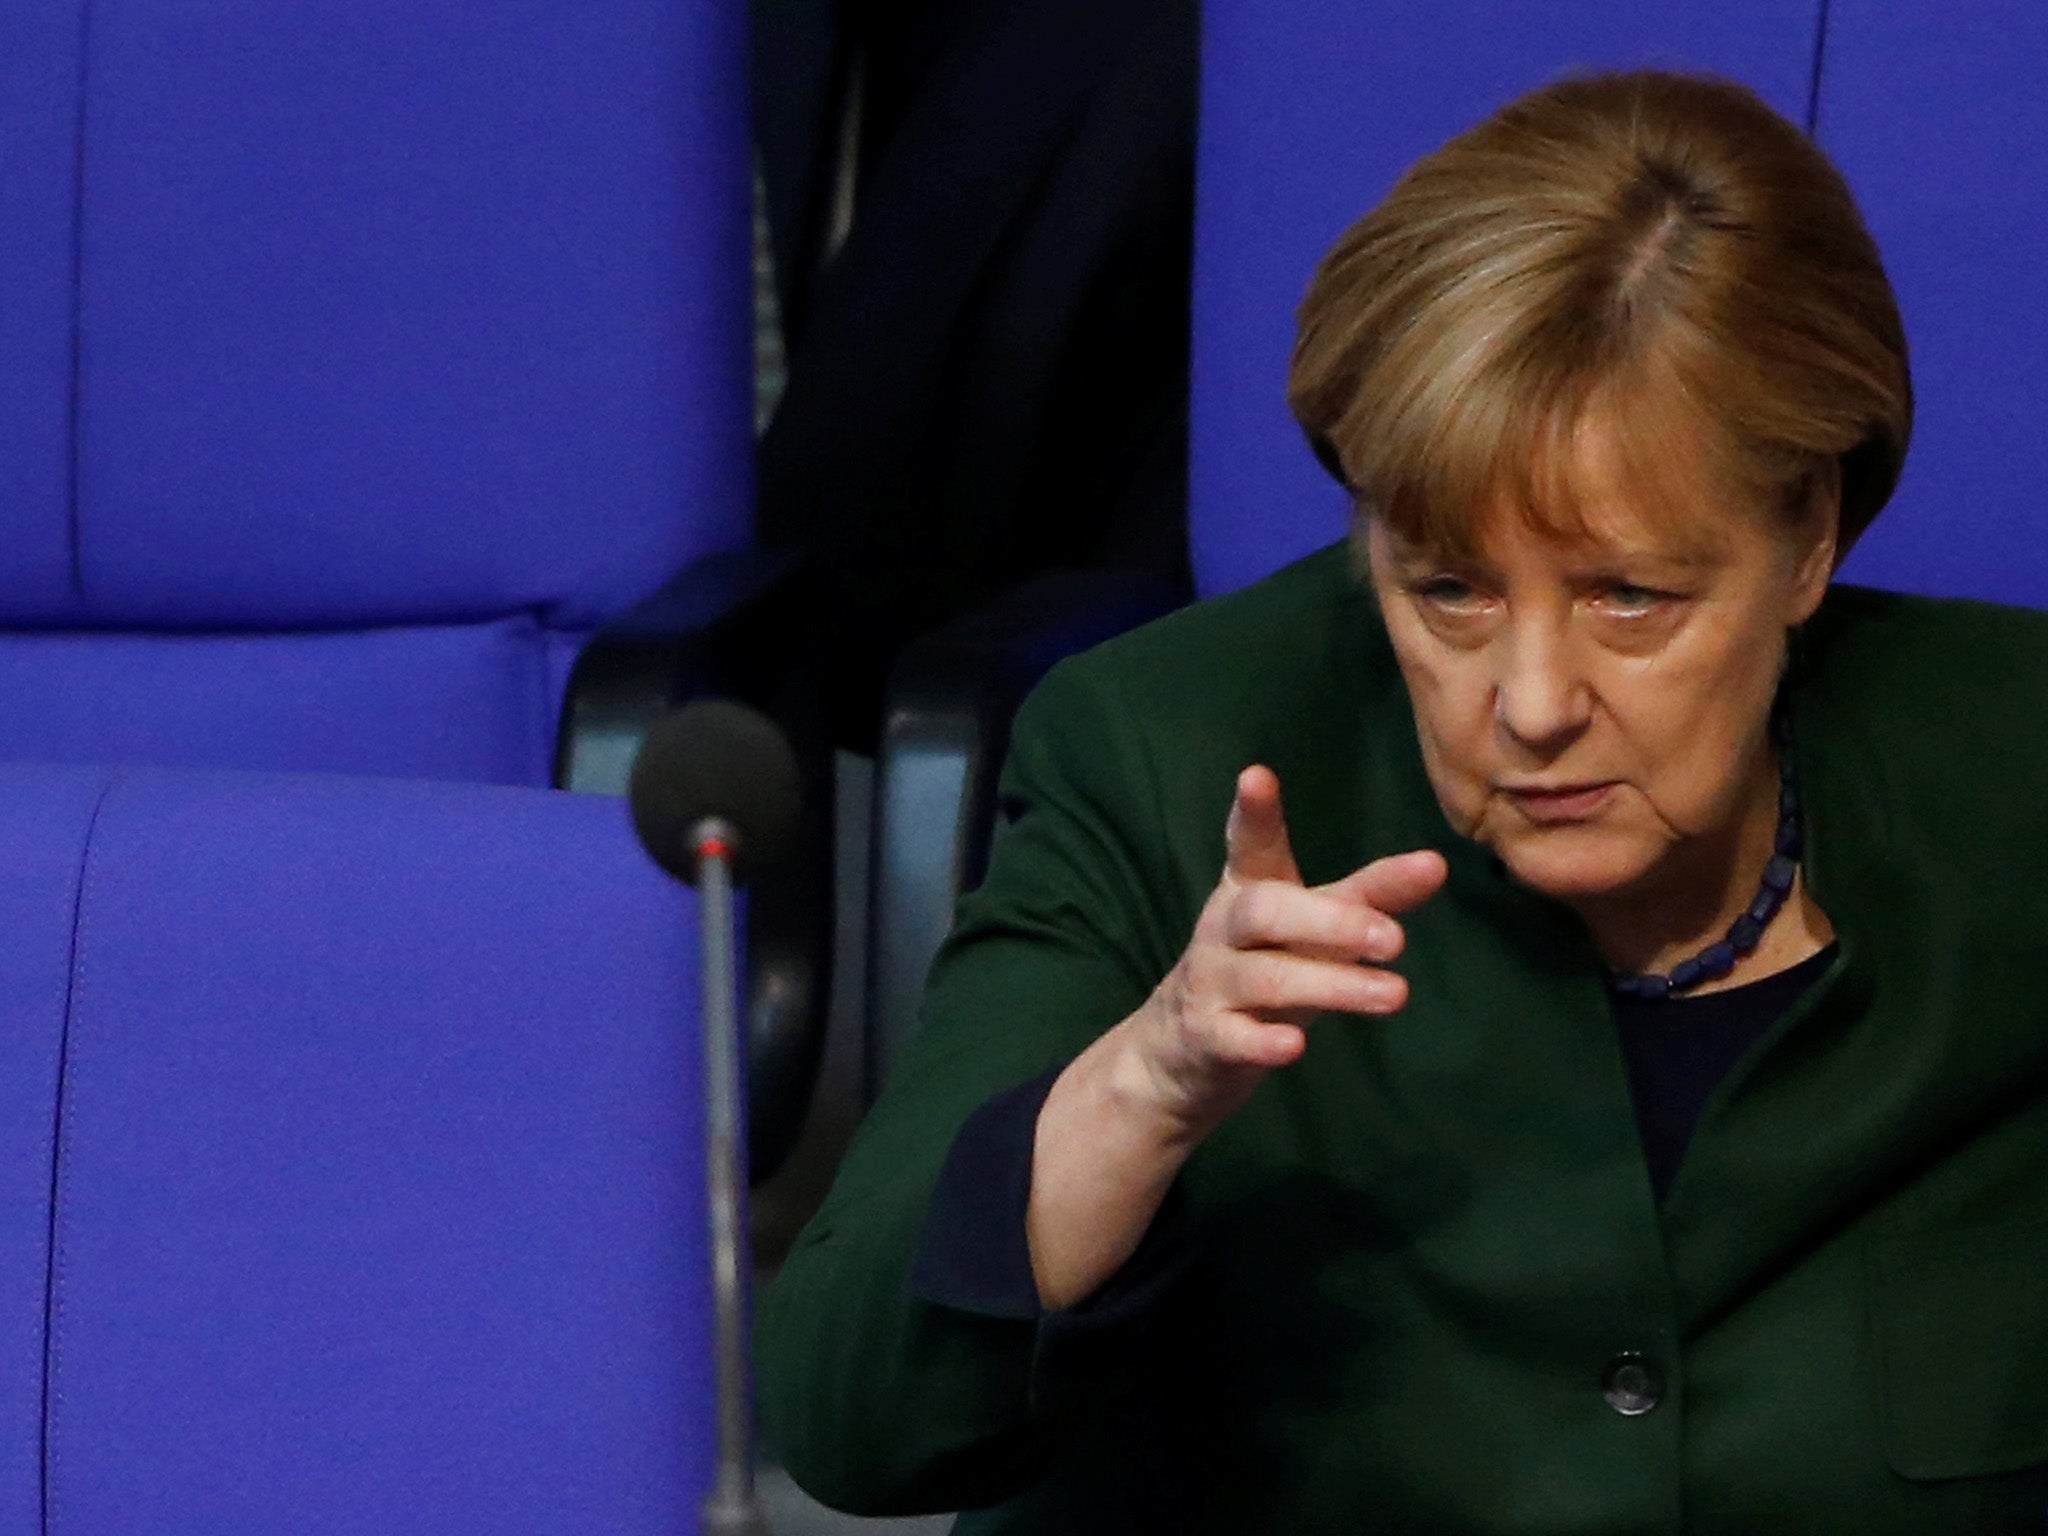 Angela Merkel has issued a warning over the boom in fake news websites ahead of the German elections